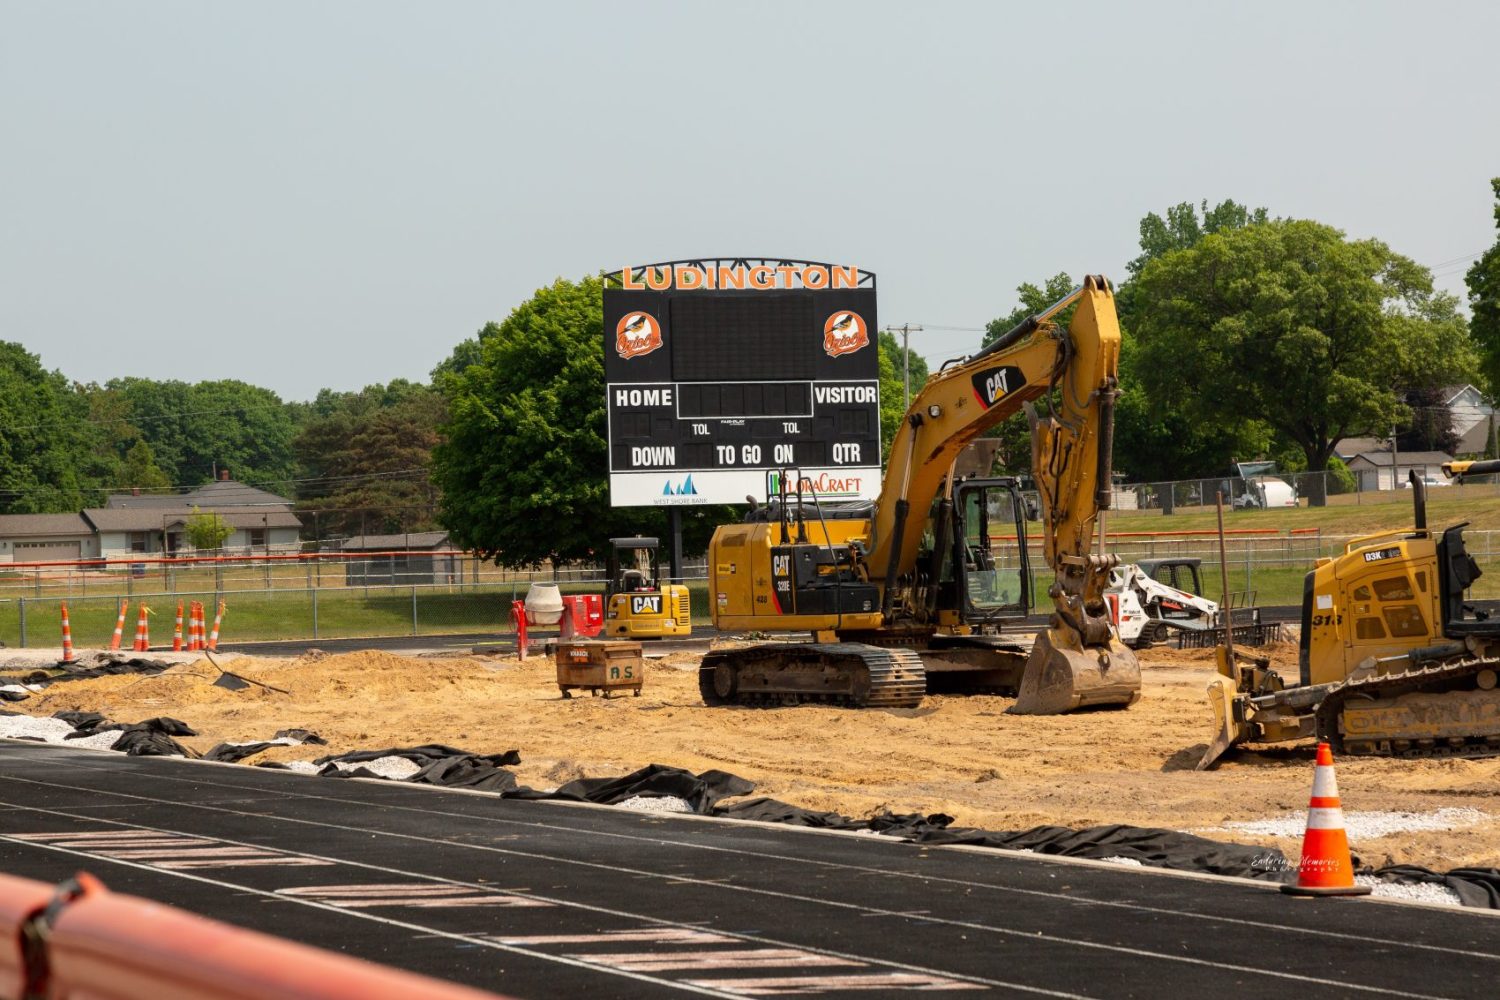 The winds of change are blowing for Ludington’s athletic facilities